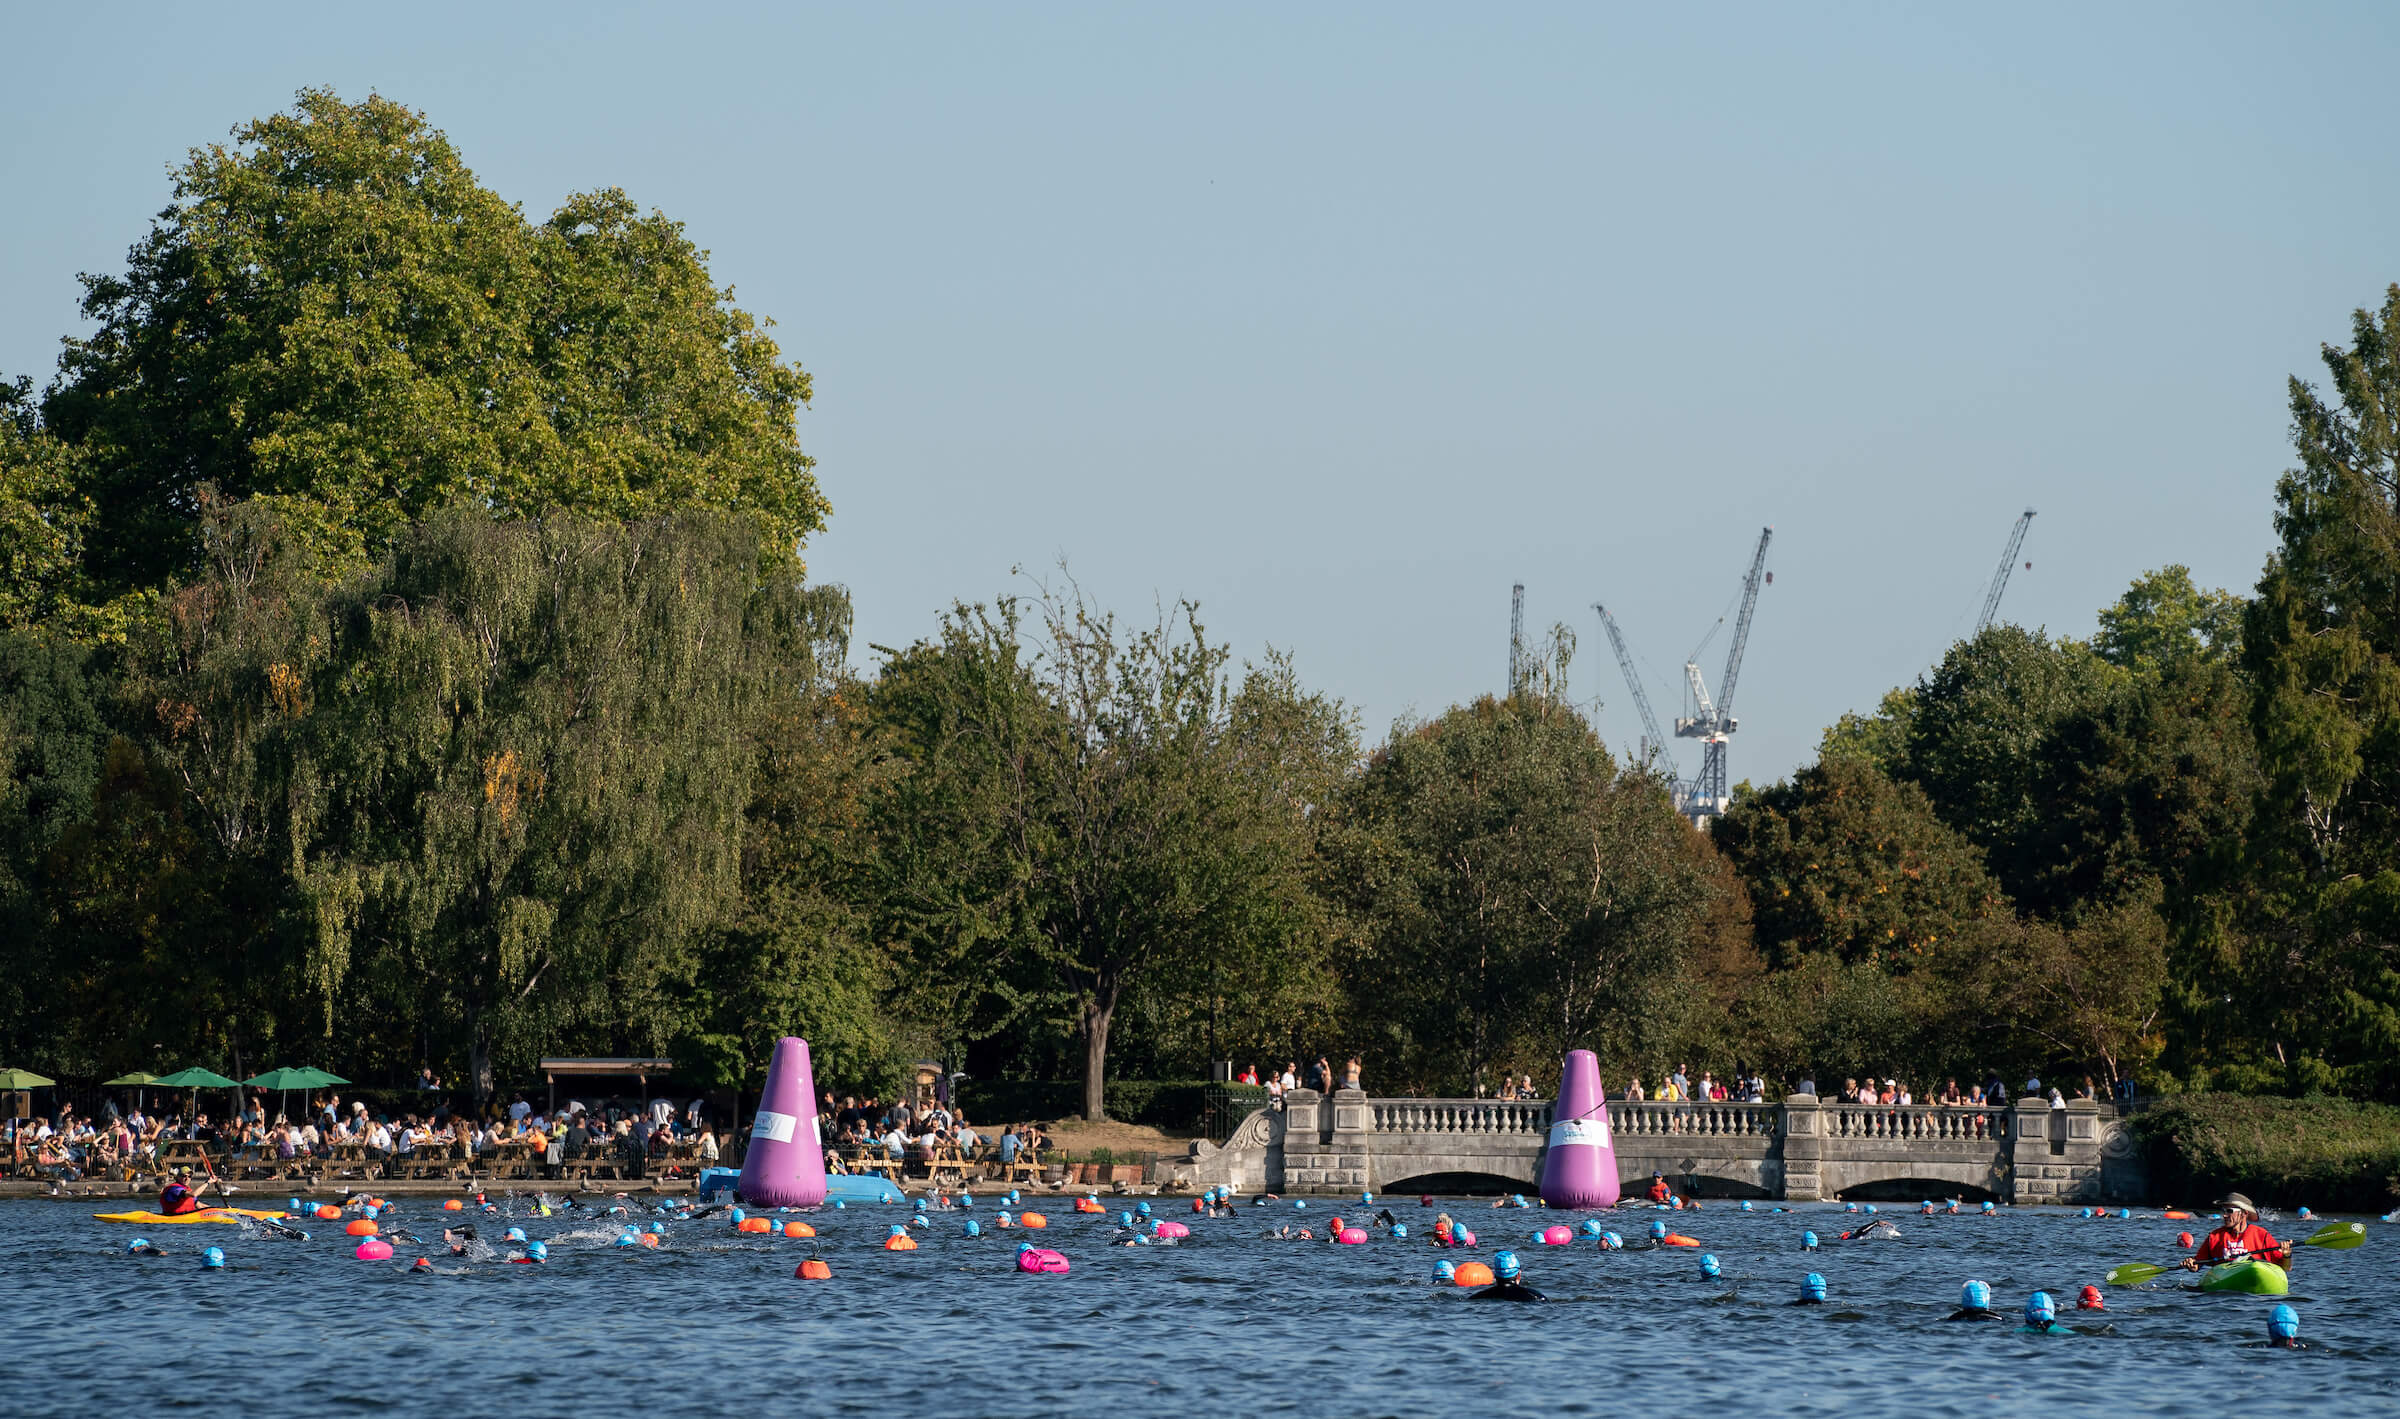 A group of swimmers in the Serpentine lake